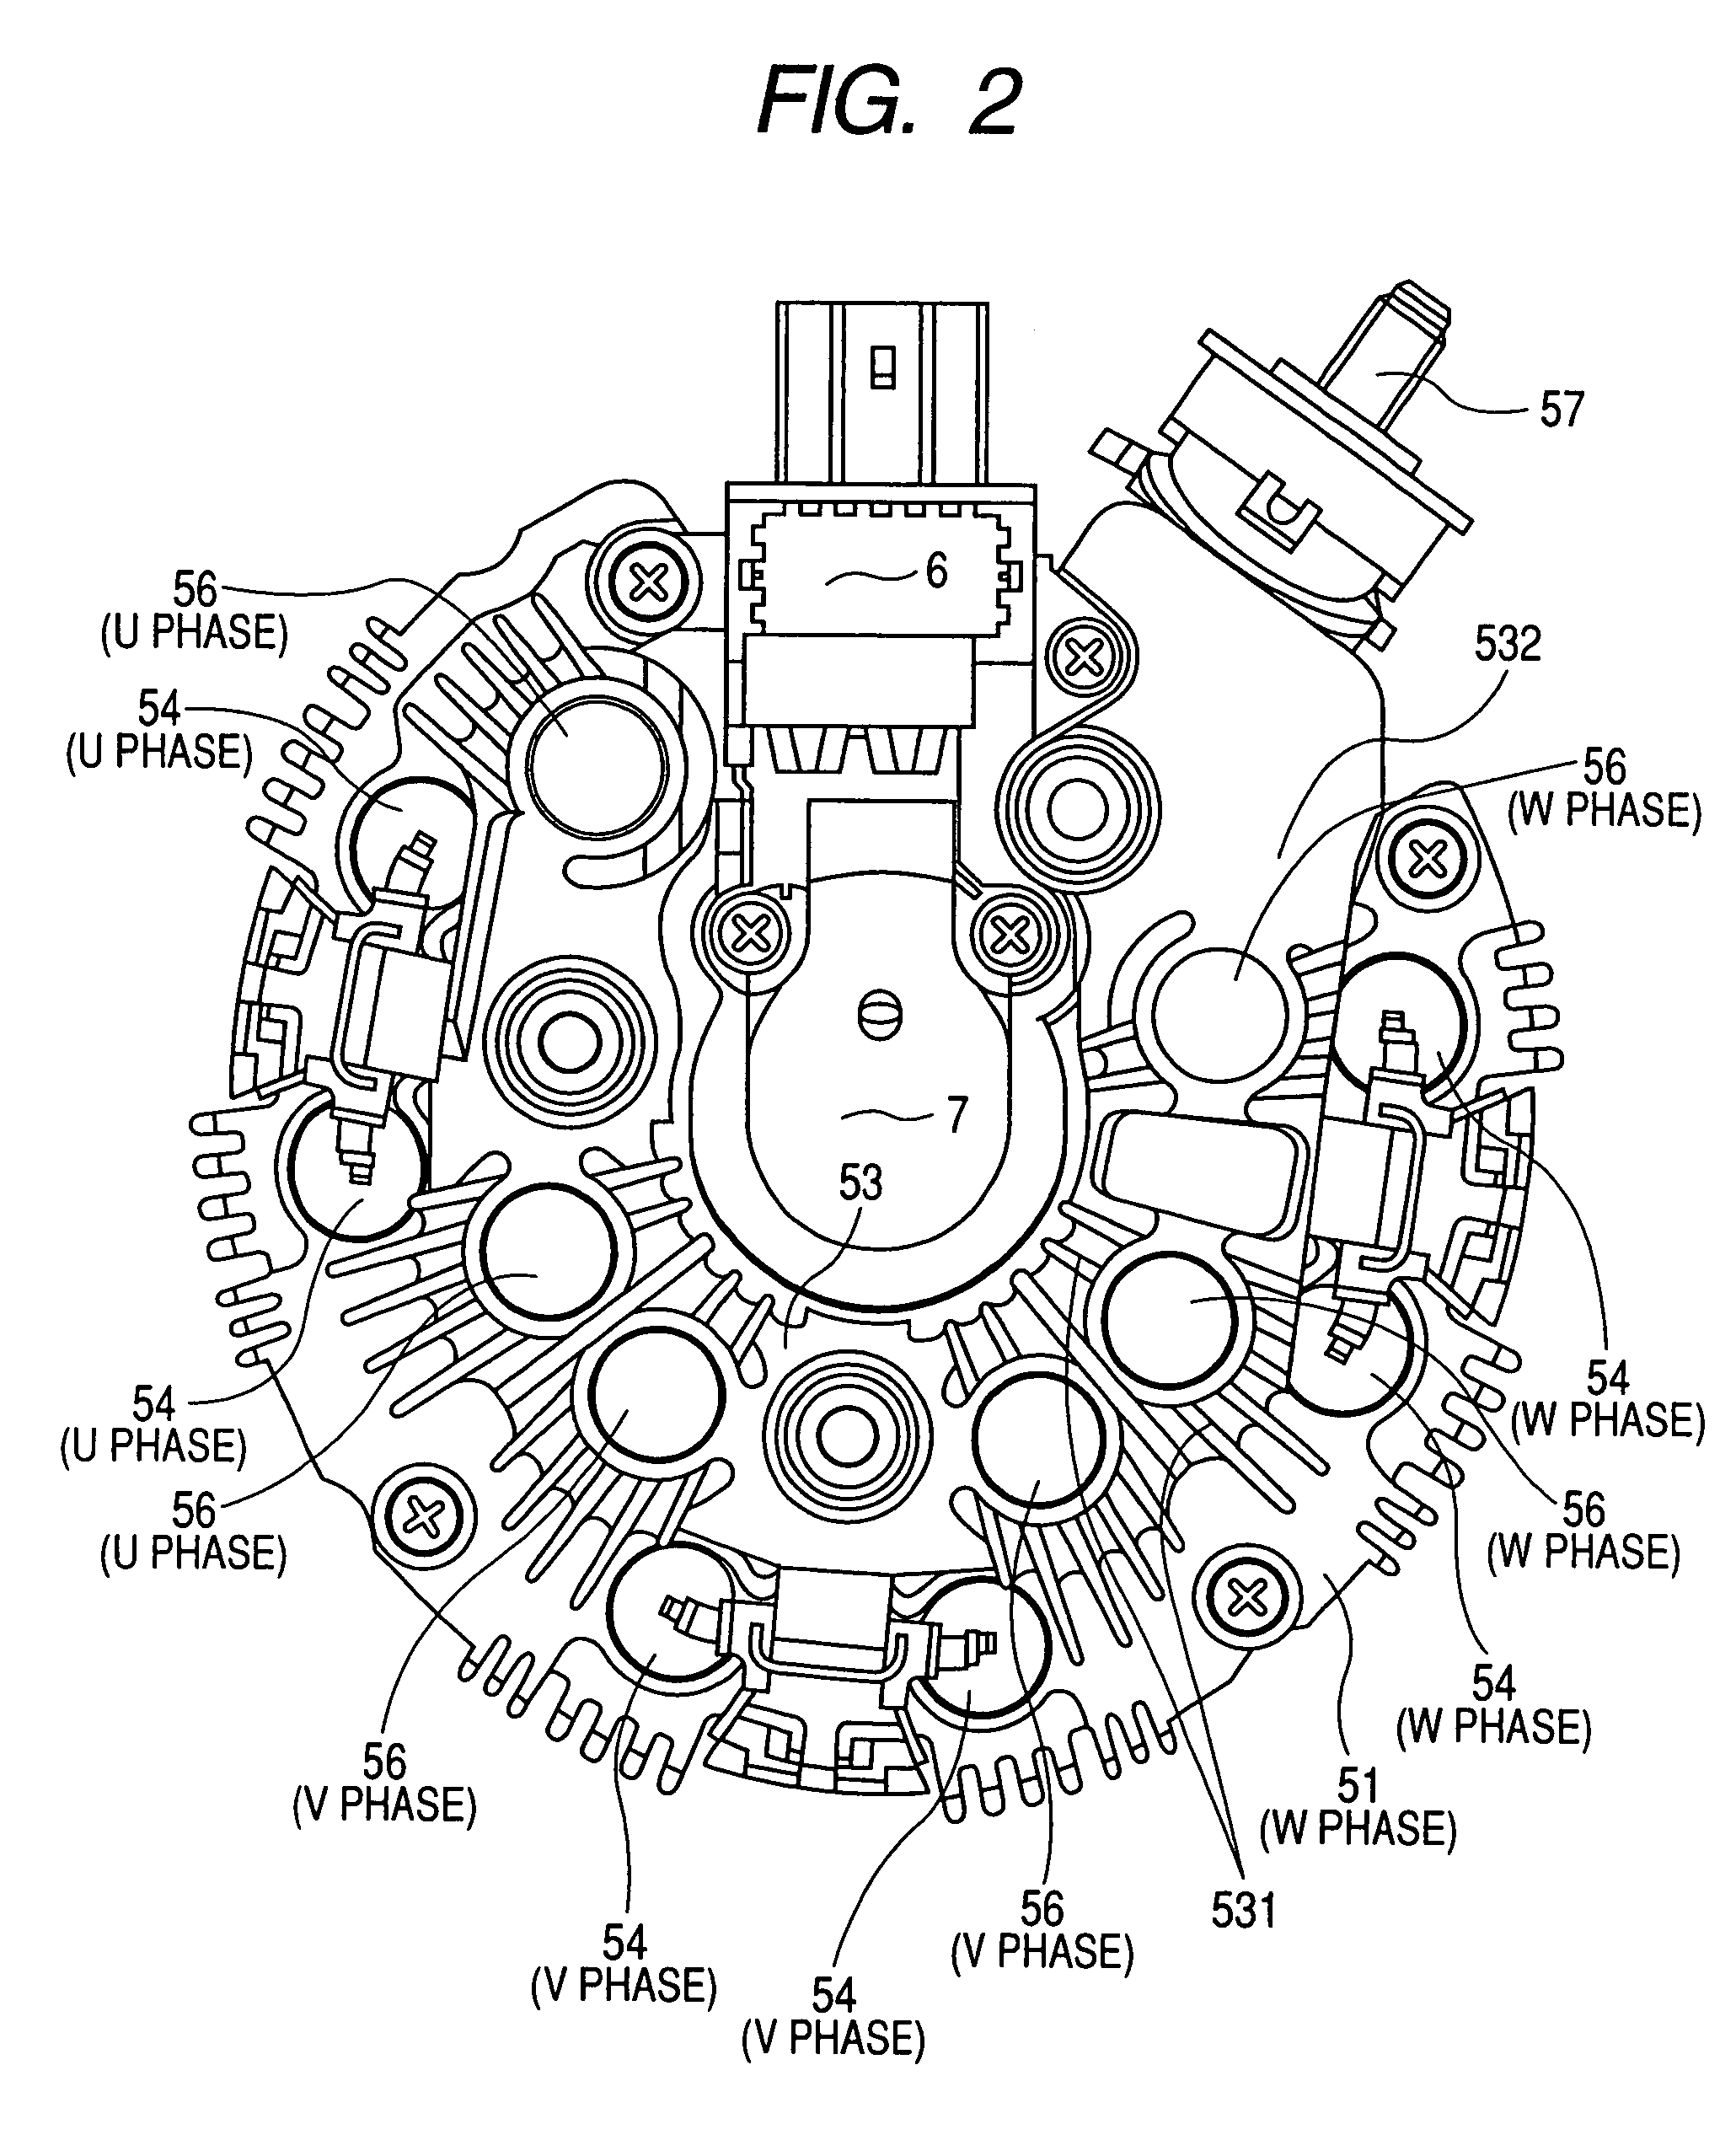 AC generator for a vehicle